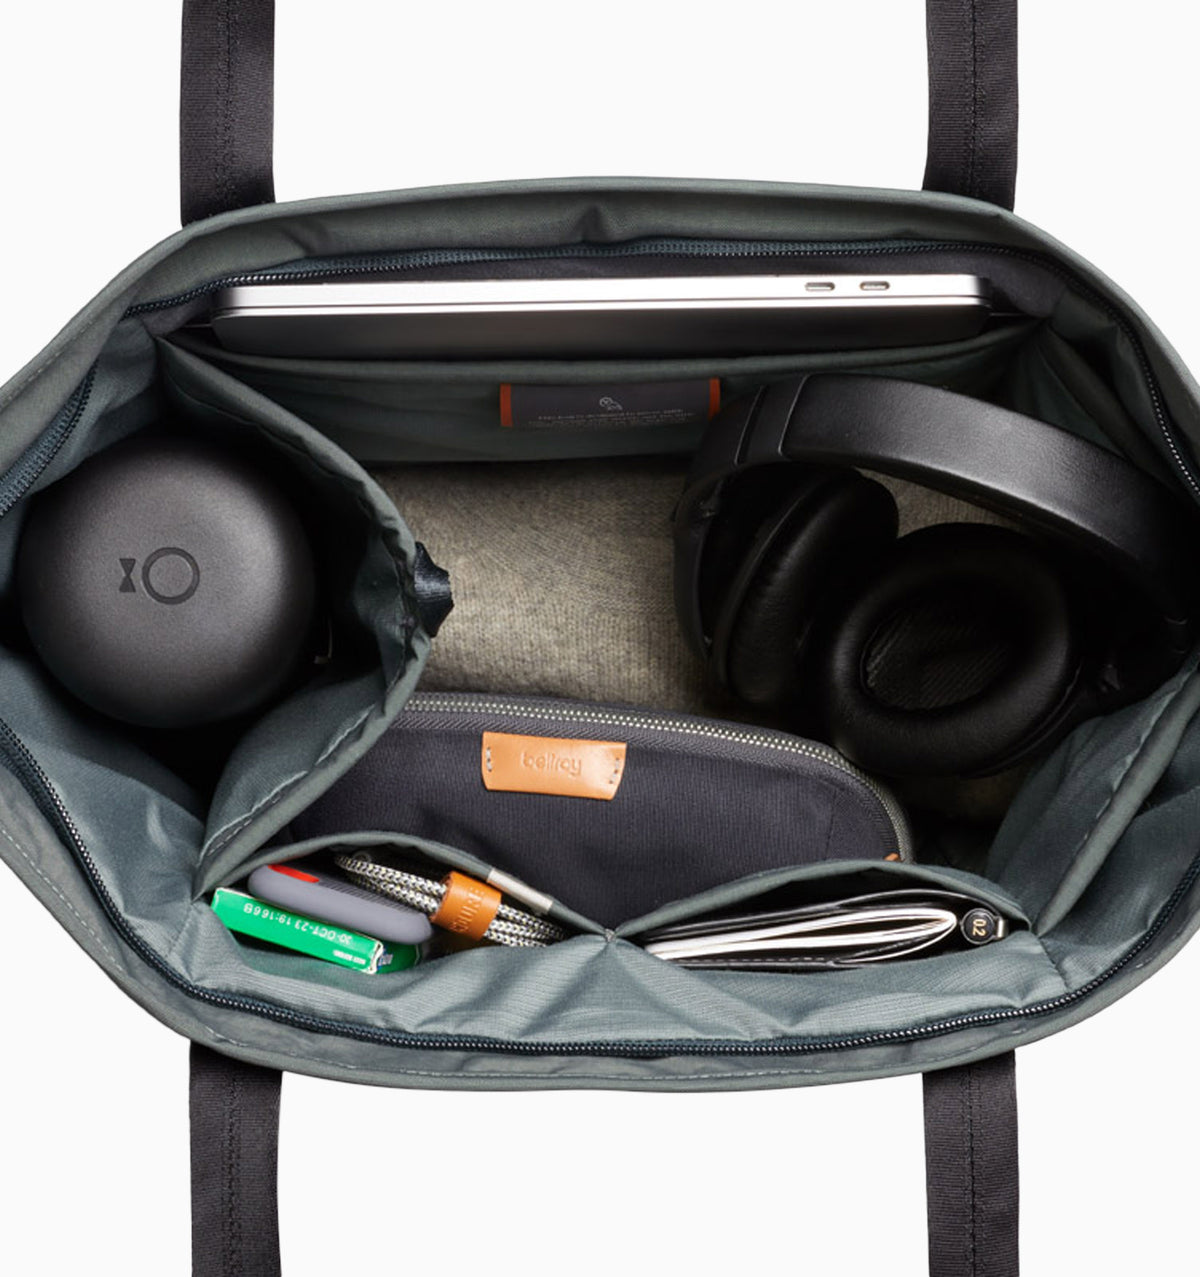 Bellroy 13" Tokyo Tote 15L (2nd Edition) - Everglade